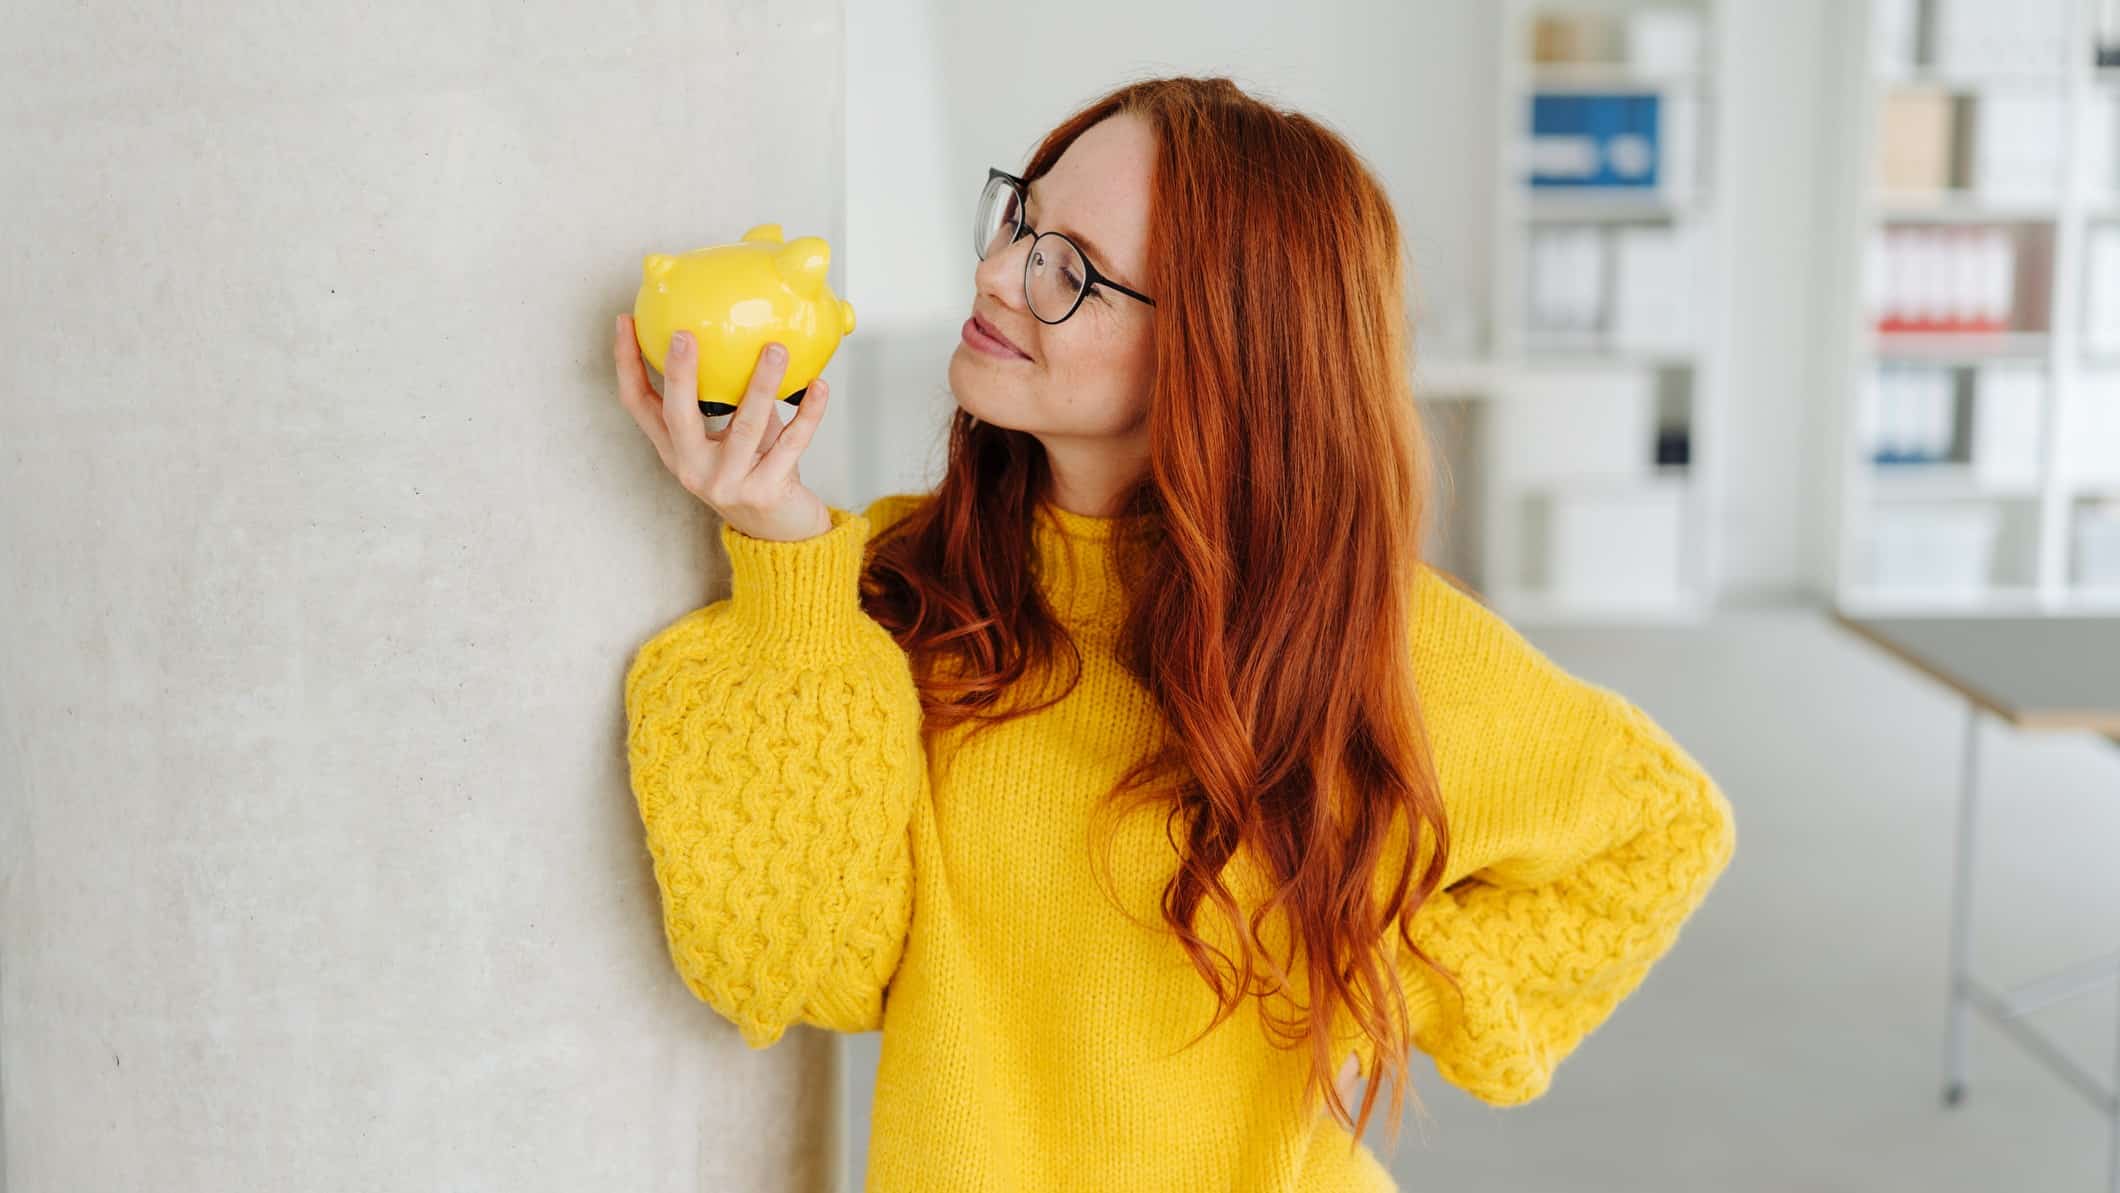 A woman in a bright yellow sweater looks happy at her yellow piggy bank.